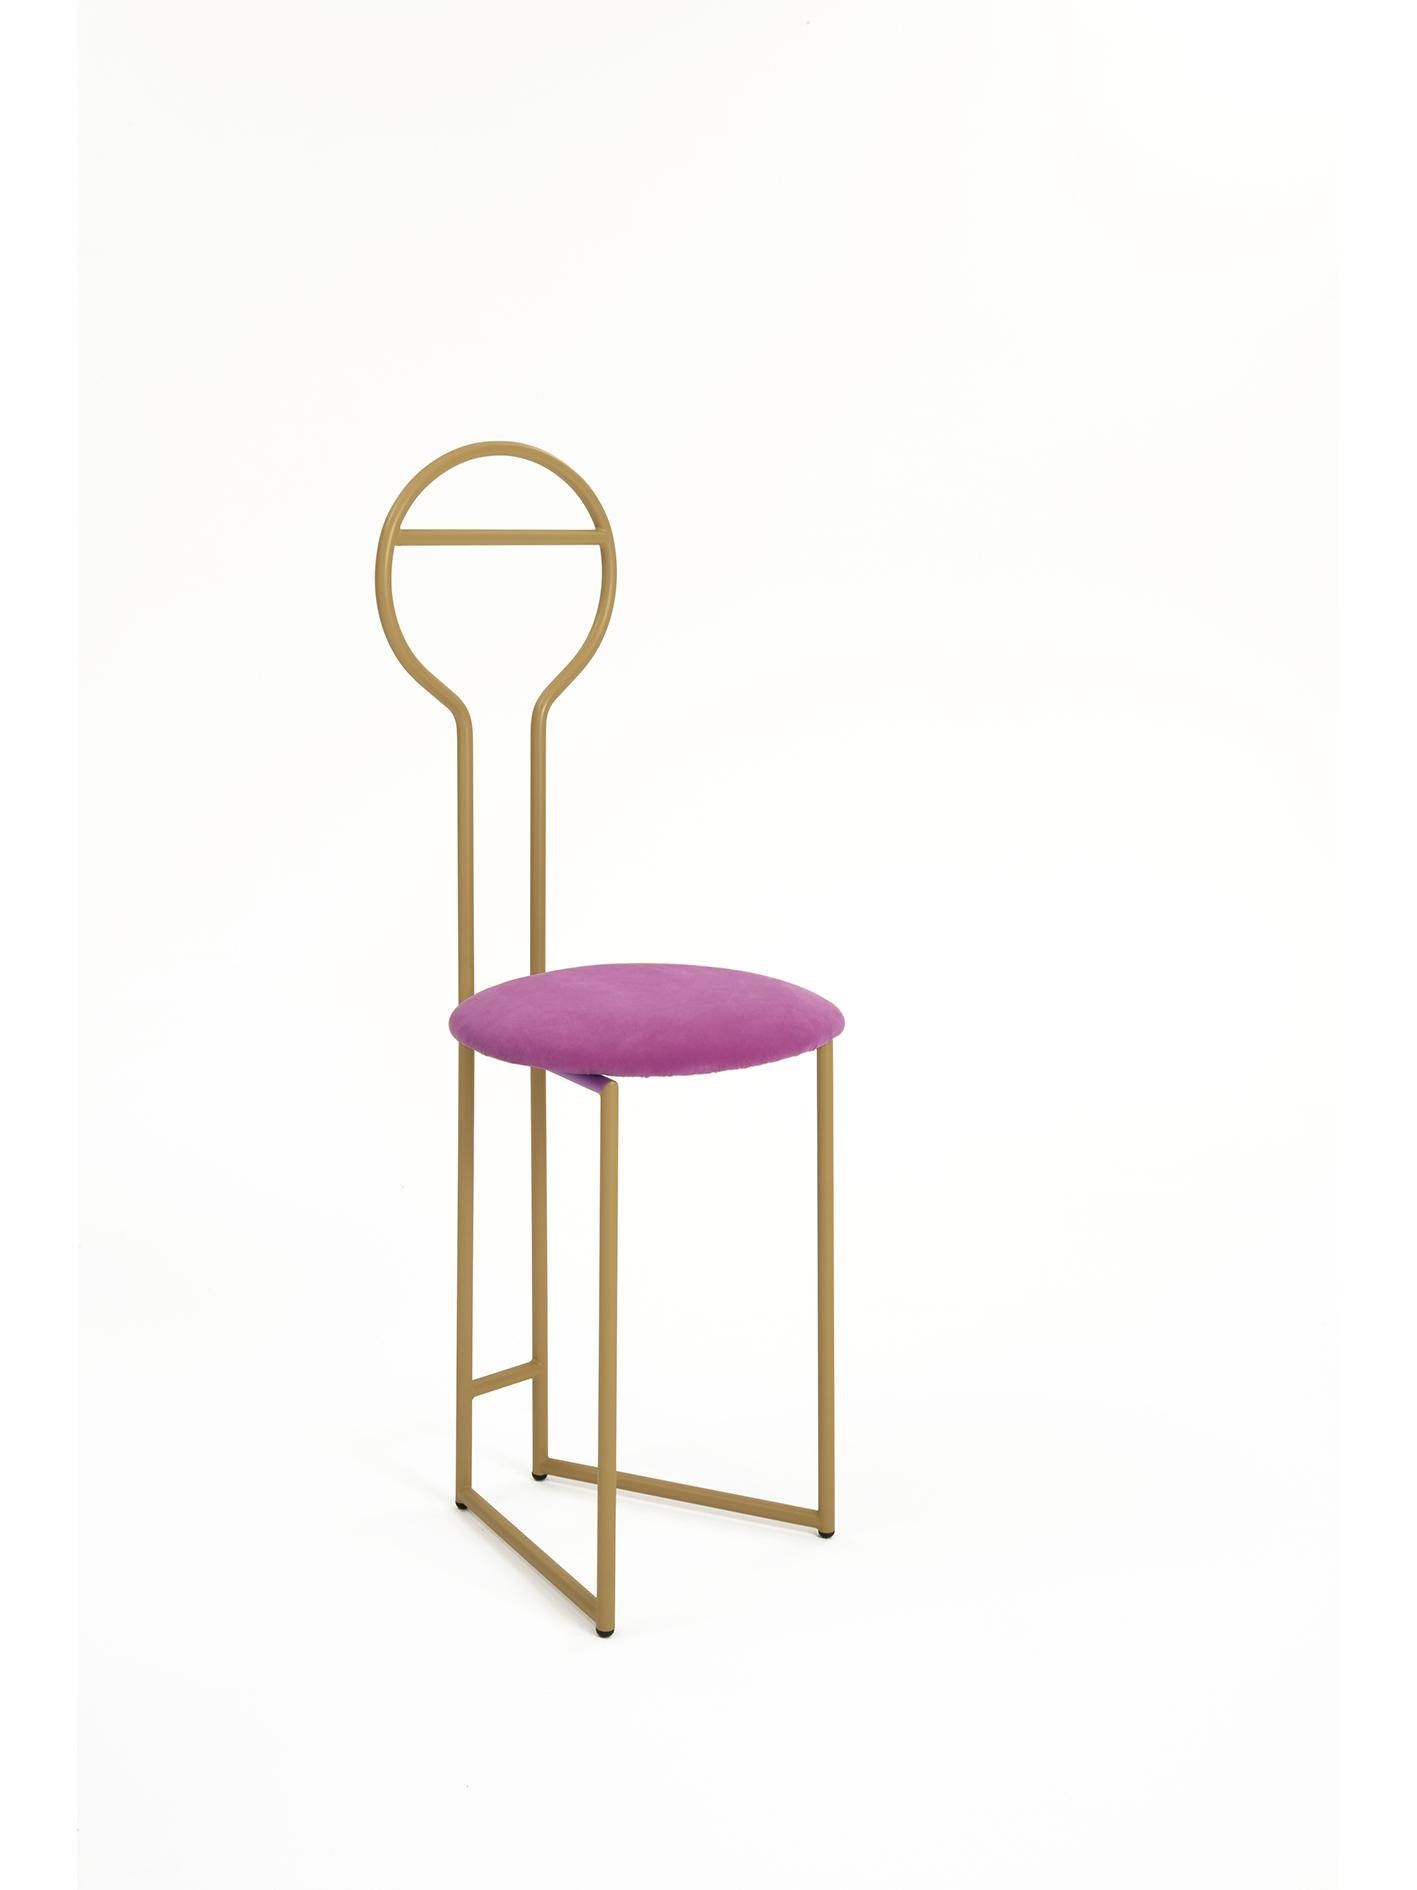 Joly Chairdrobe design Lorenz + Kaz, 2019
Made of gold powder-coated metal with padded cushion seat in green velvet fire class E1 (the listed version). Available in 4 different fabric categories, including linen, felt, leather, eco-leather,